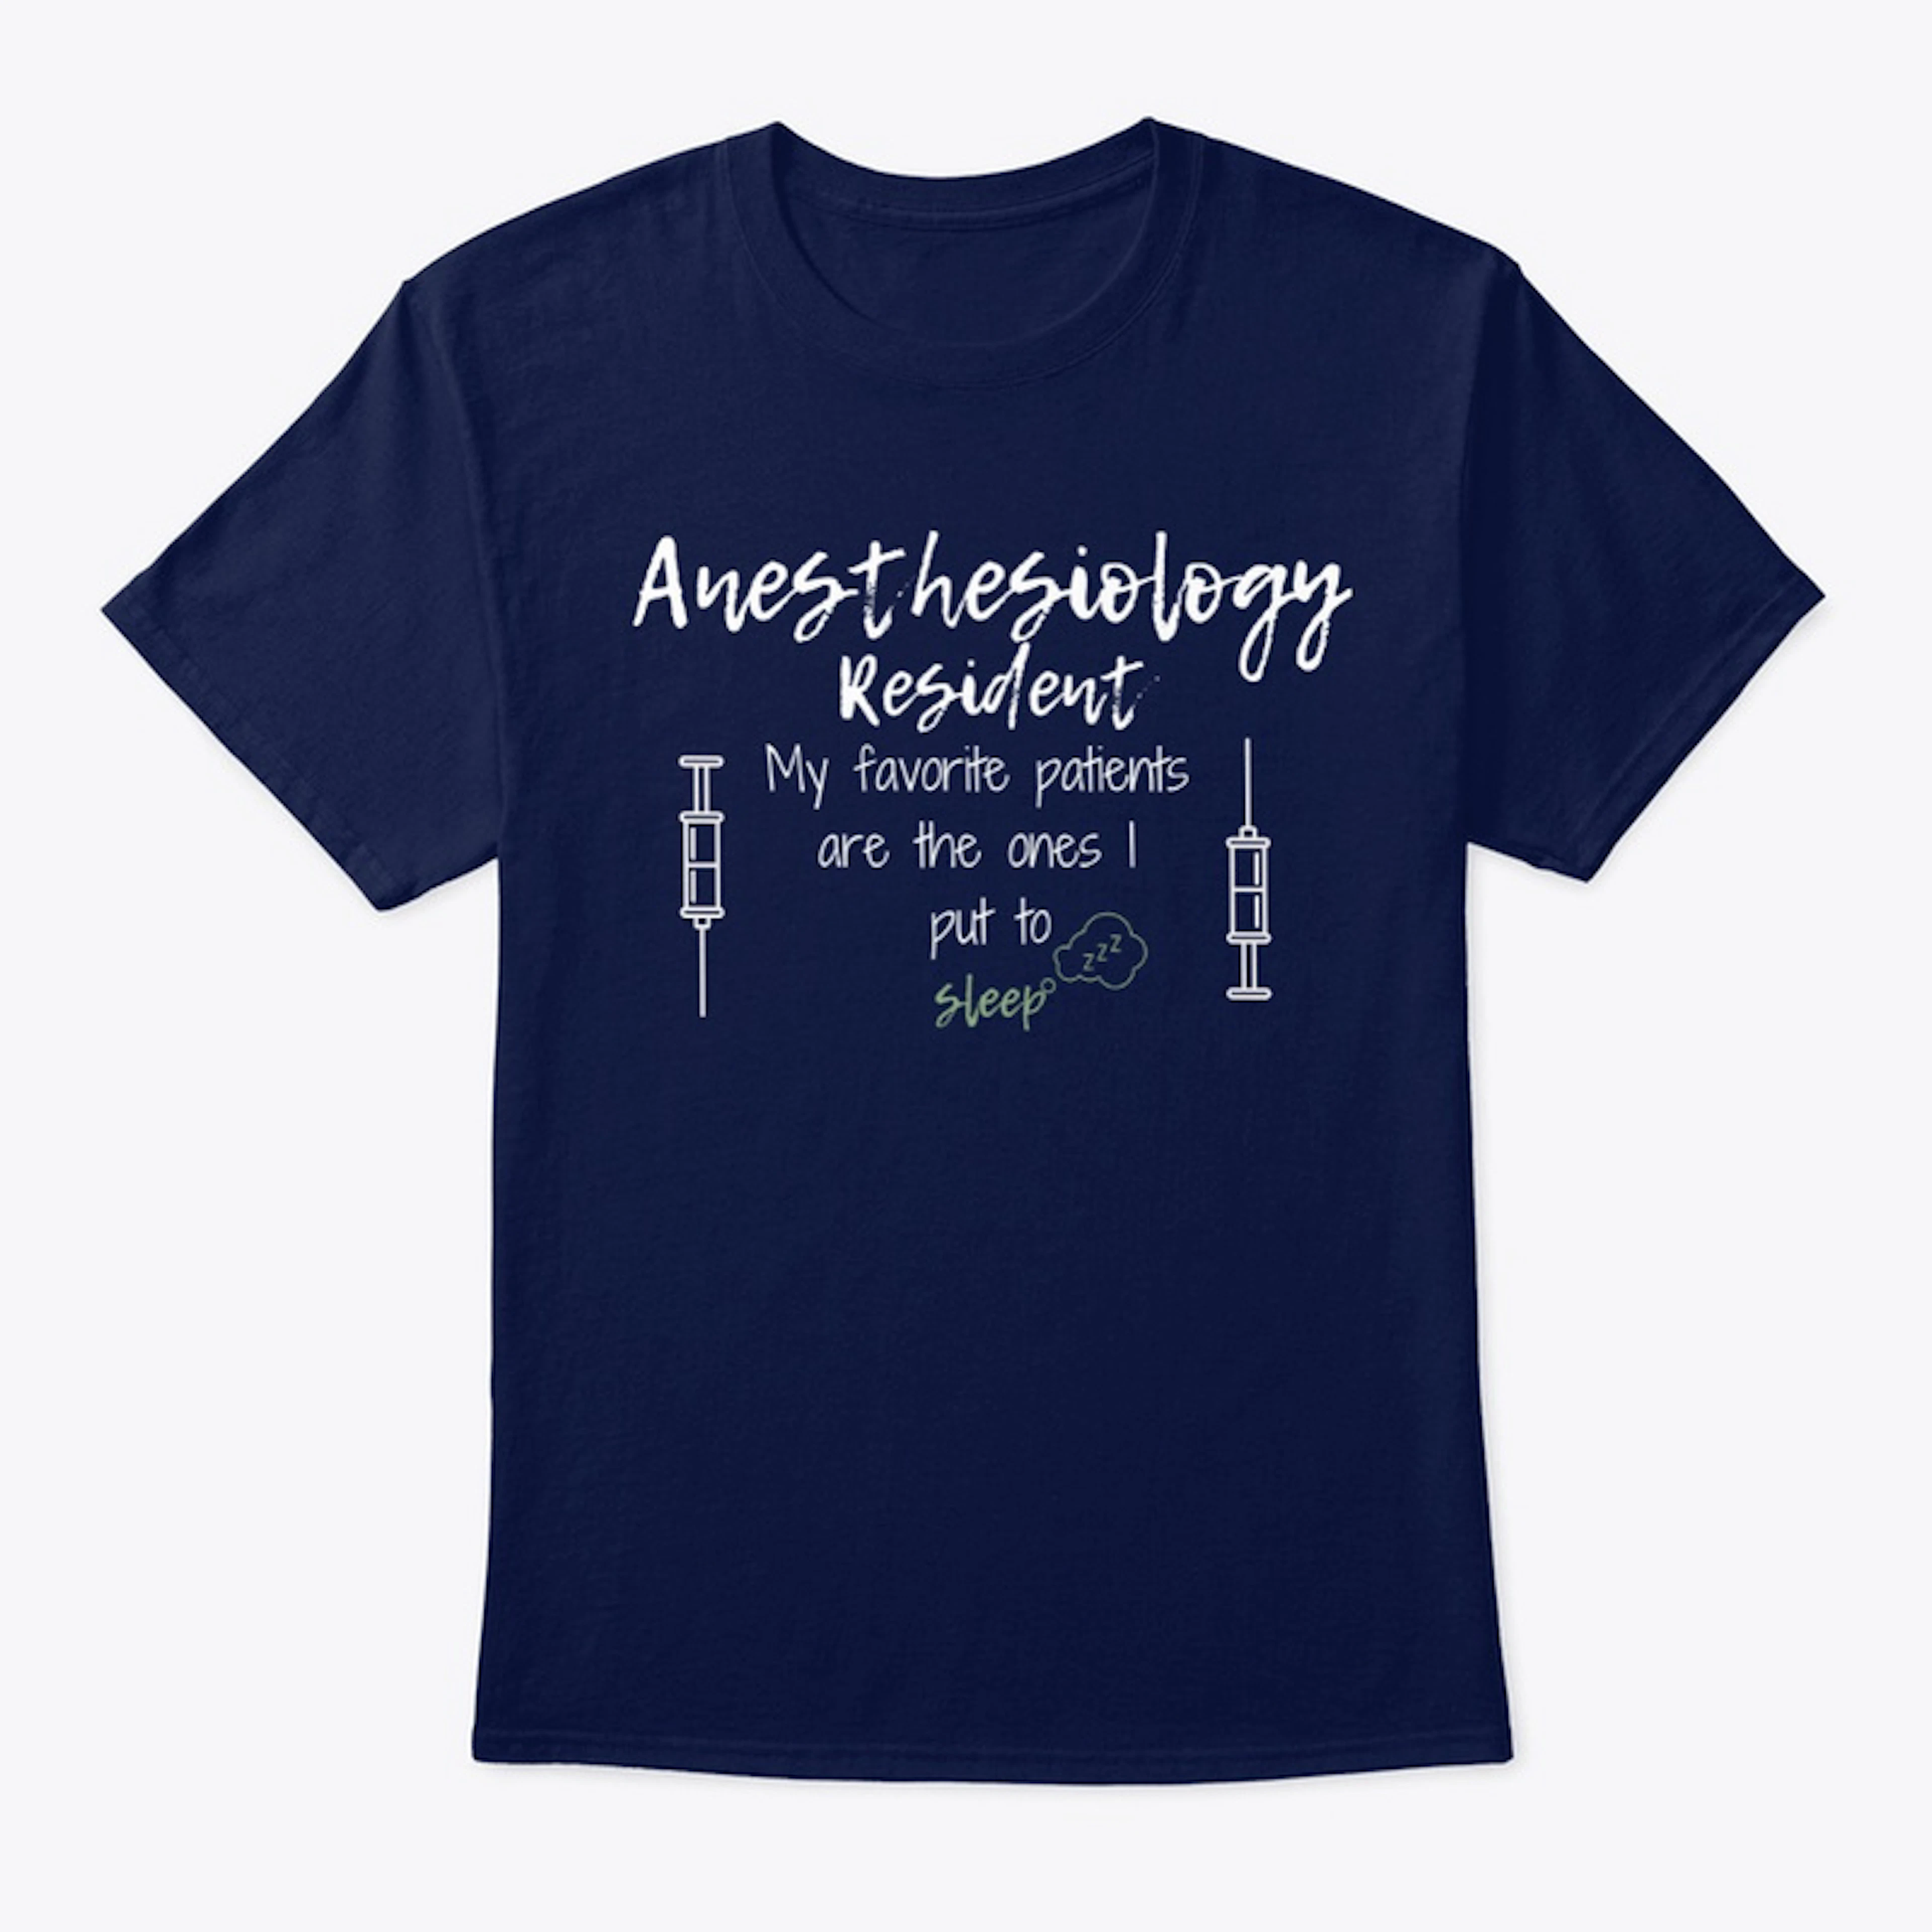 The Anesthesiology Resident(multi color)